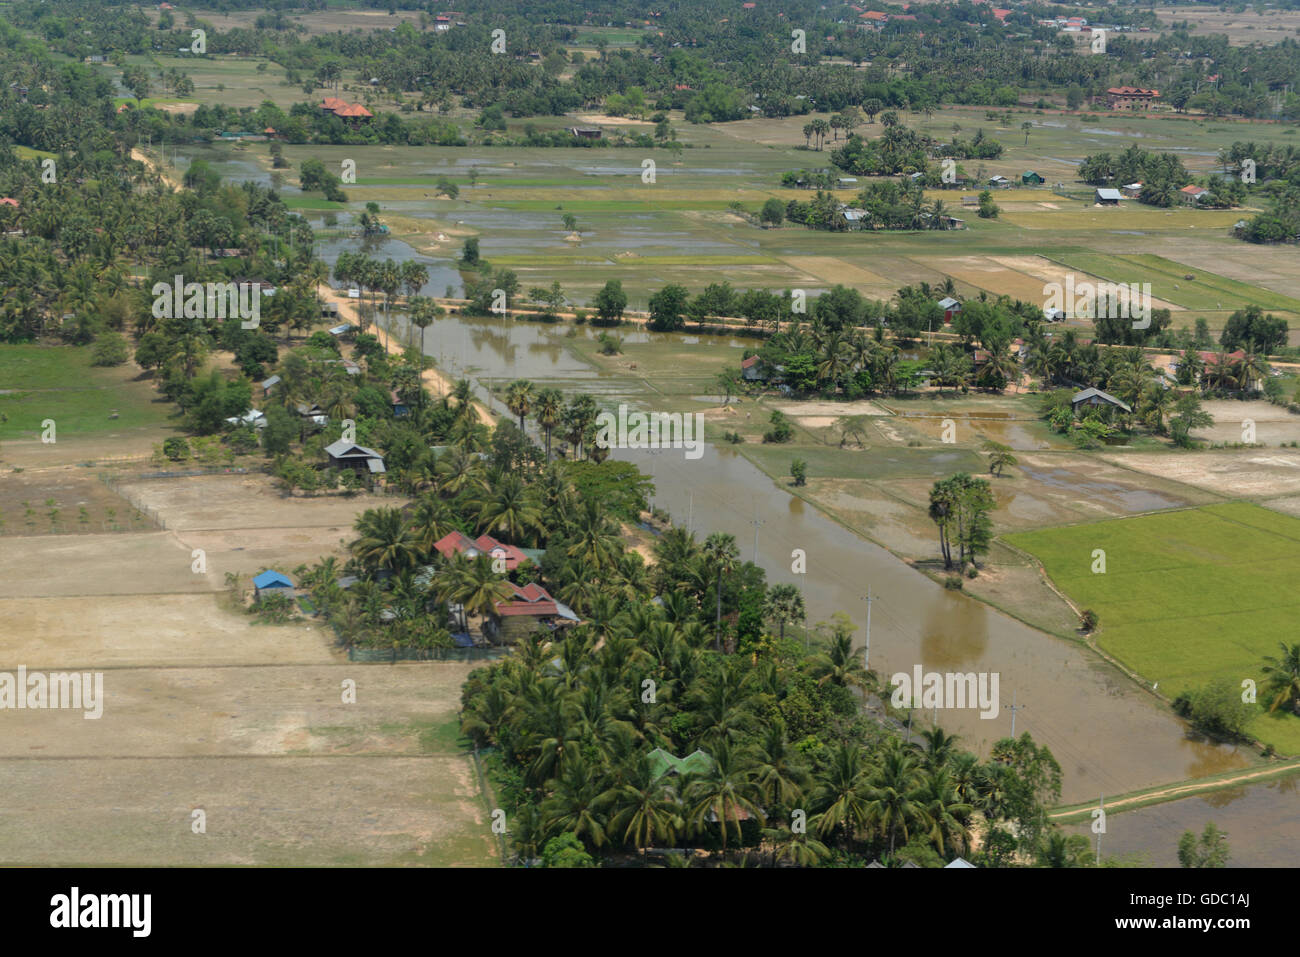 The Landscape with a ricefield near the City of Siem Riep in the west of Cambodia. Stock Photo